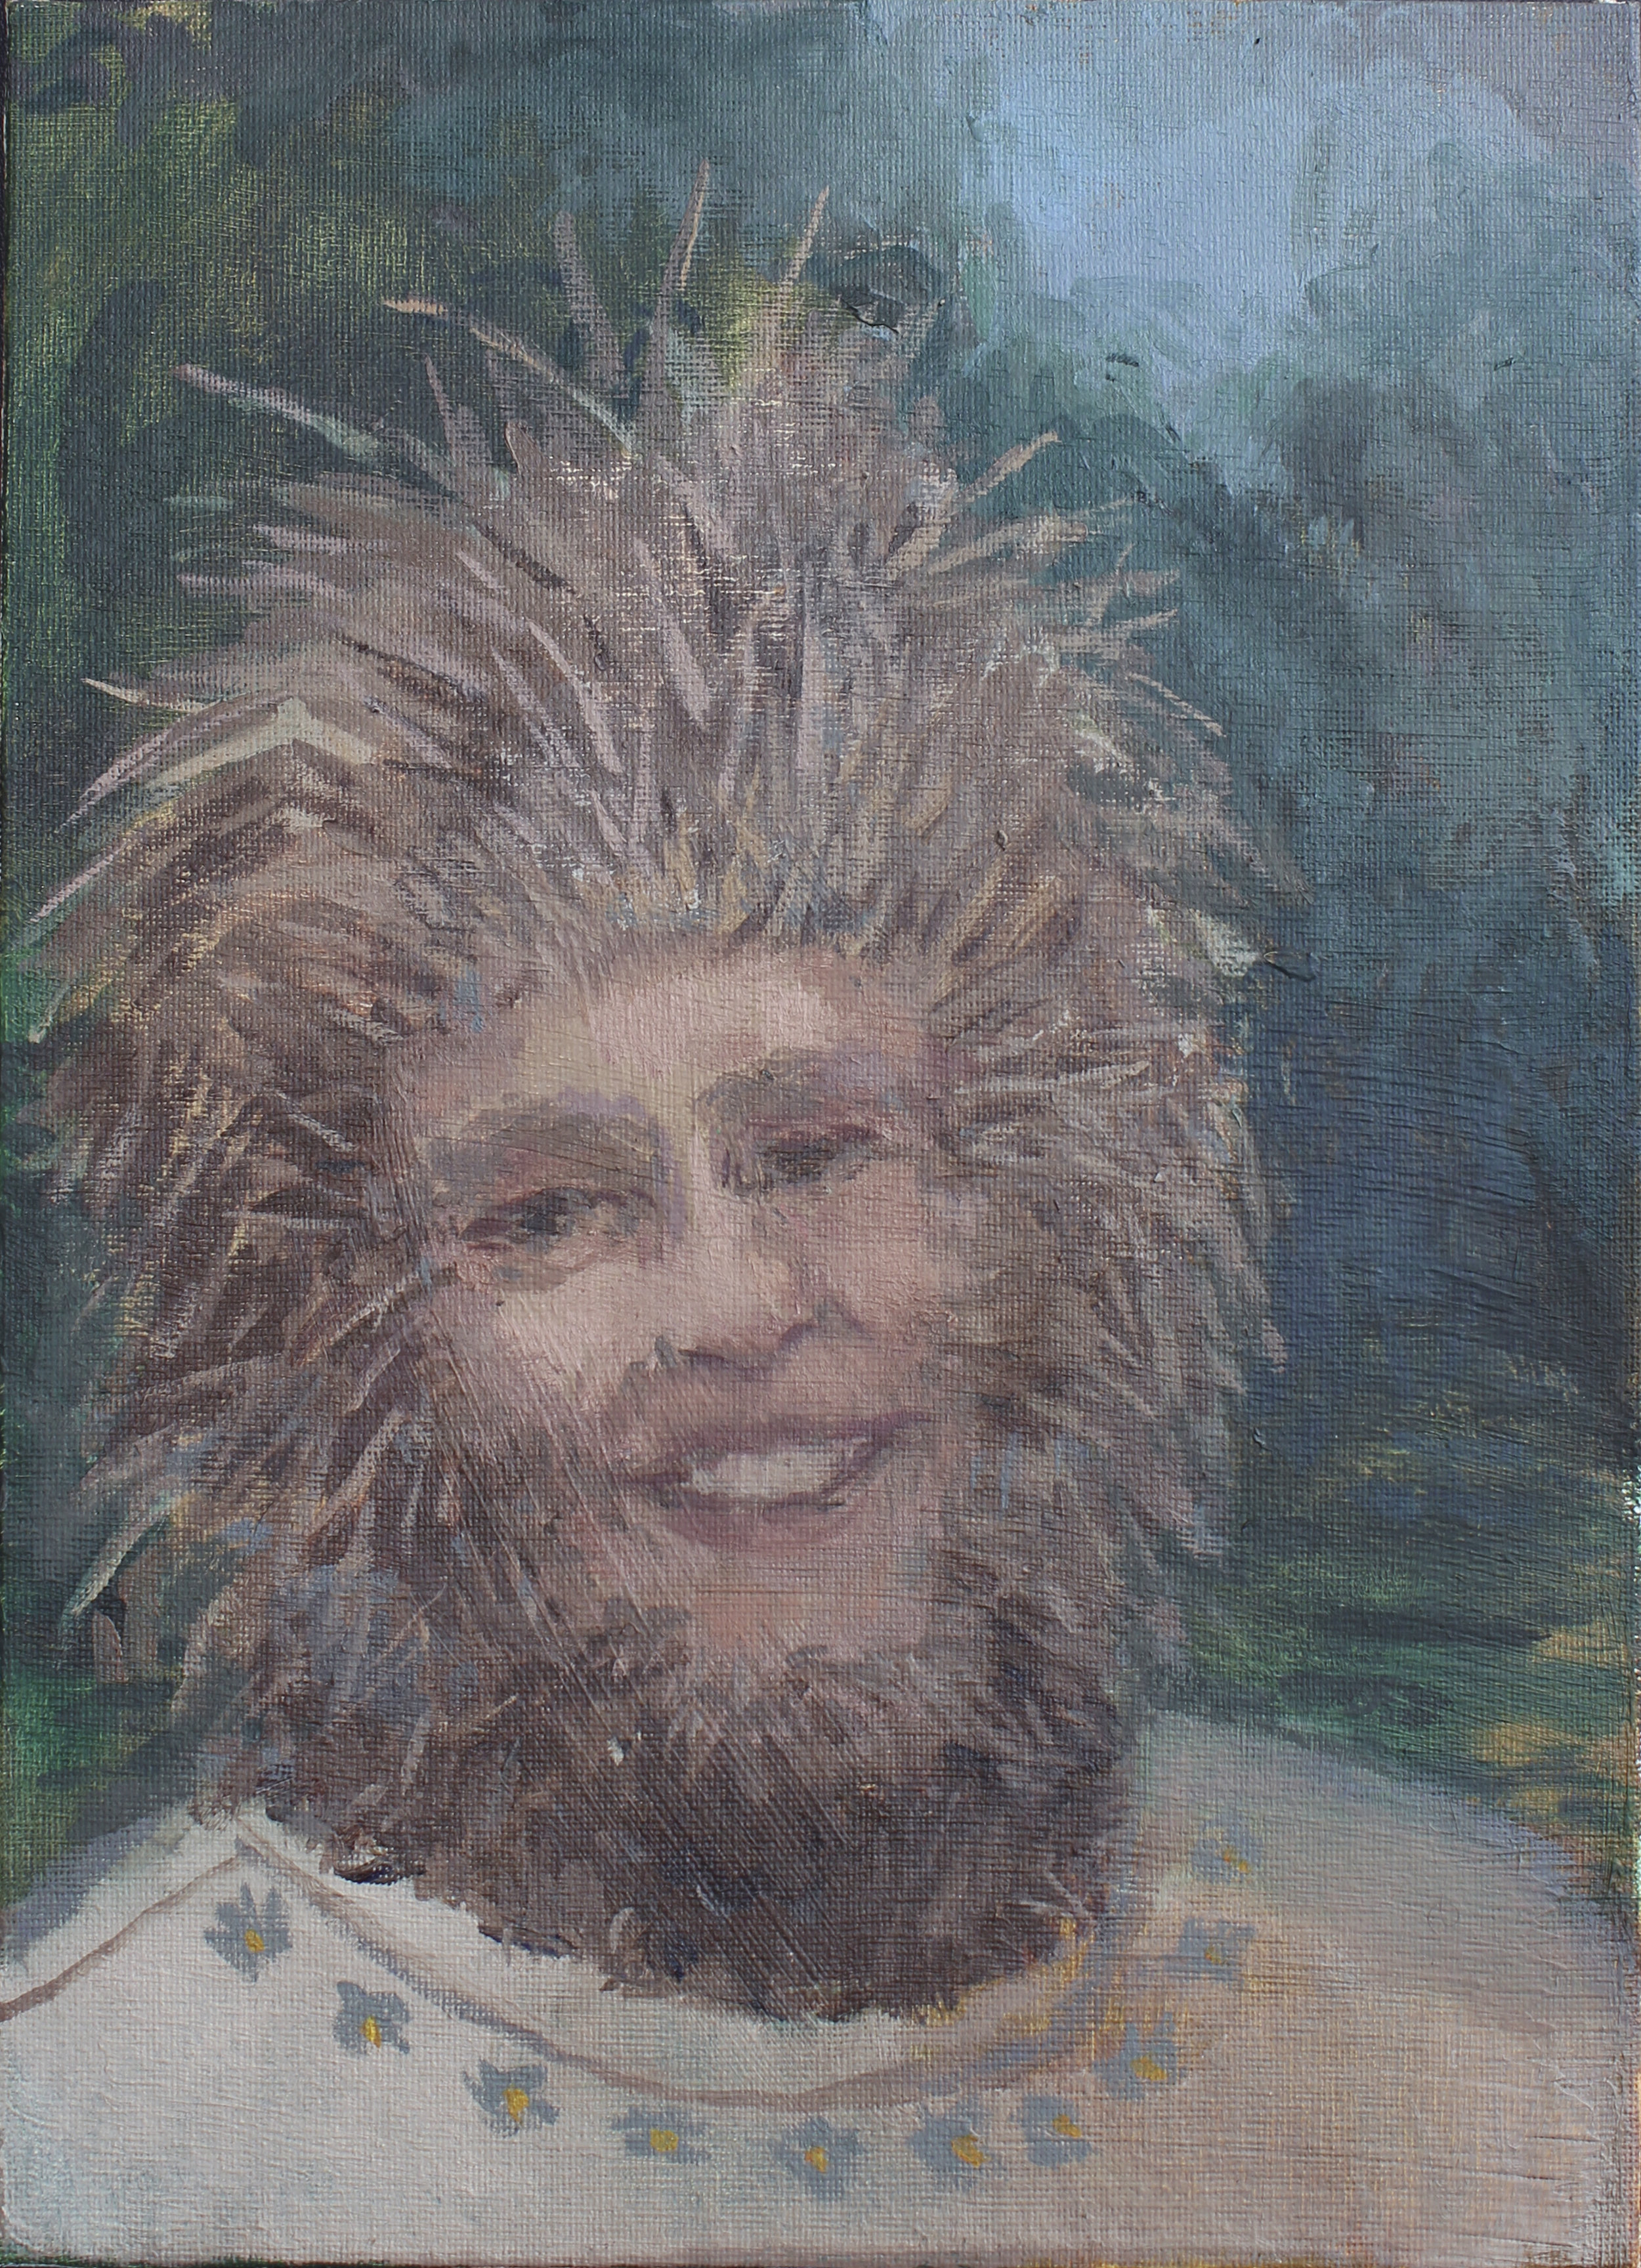    porcupine lady     oil on canvas 9x12" 2016  private collection New Jersey 